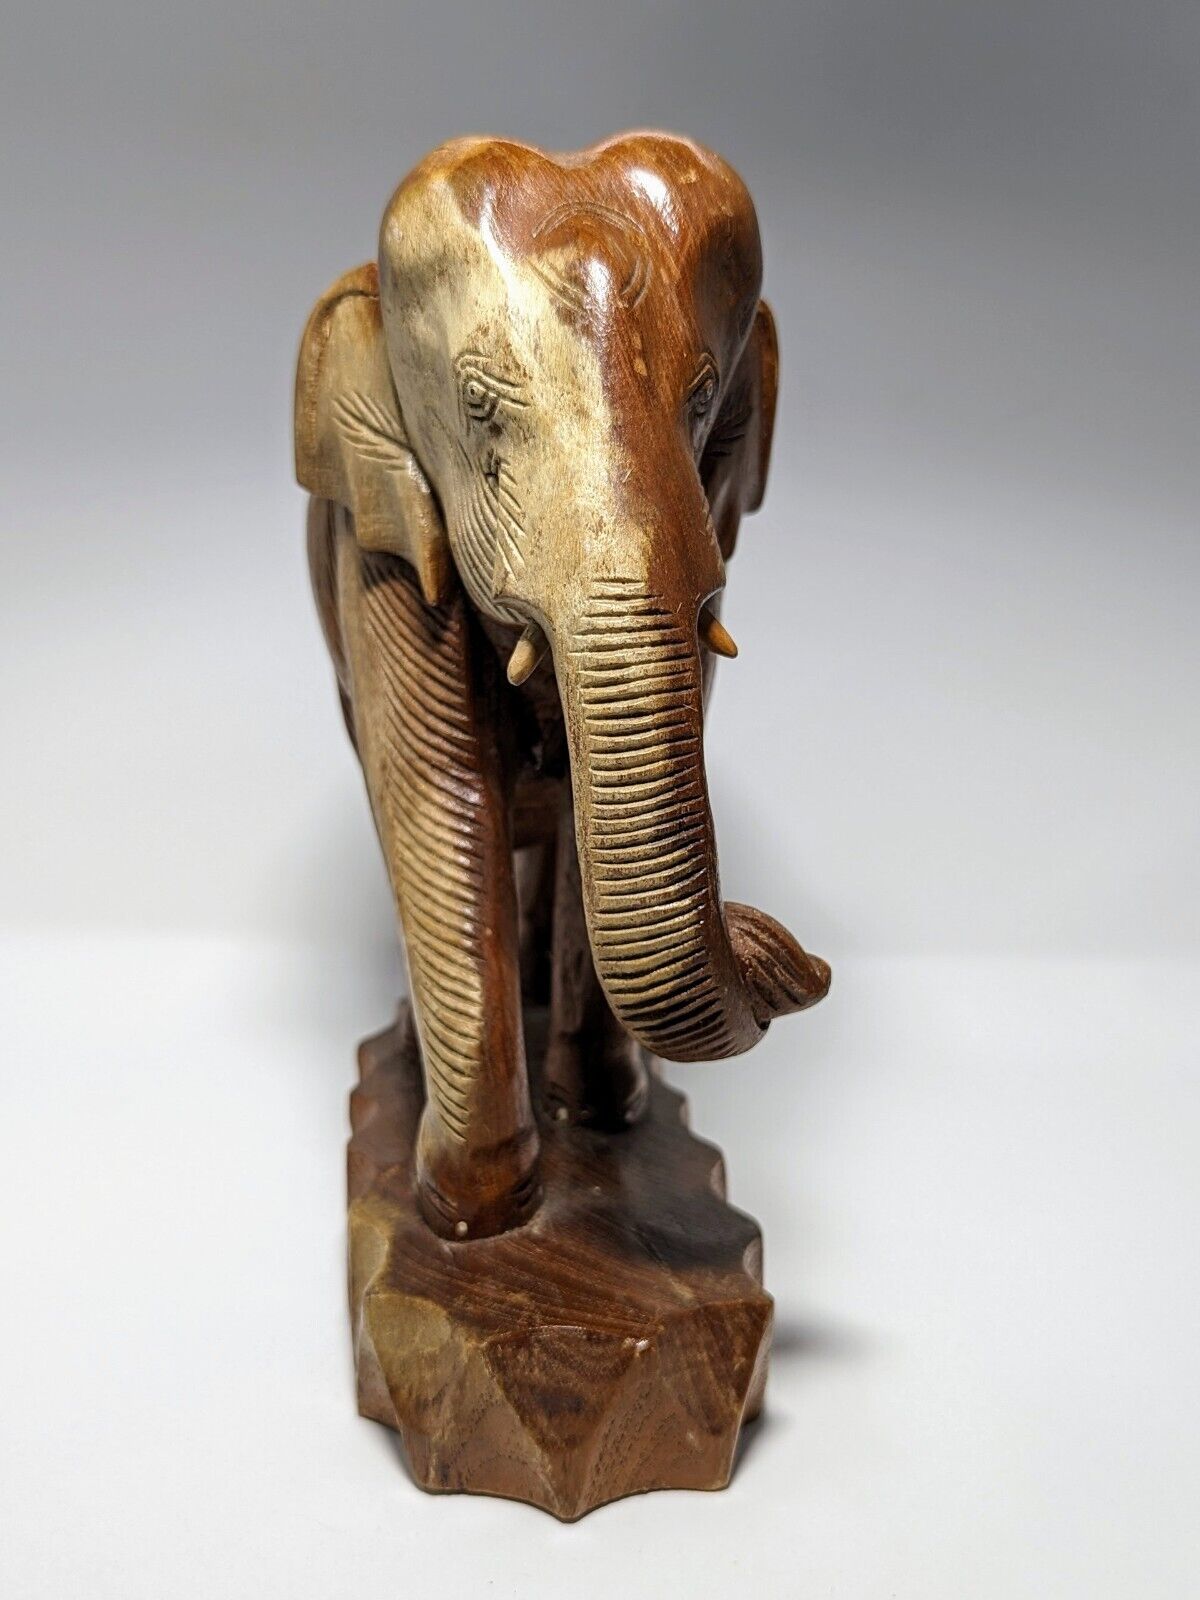 Hand Carved Elephant Solid Wood Sculpture 13.5\'\' x 14\'\'h Unique Two-Toned Gem